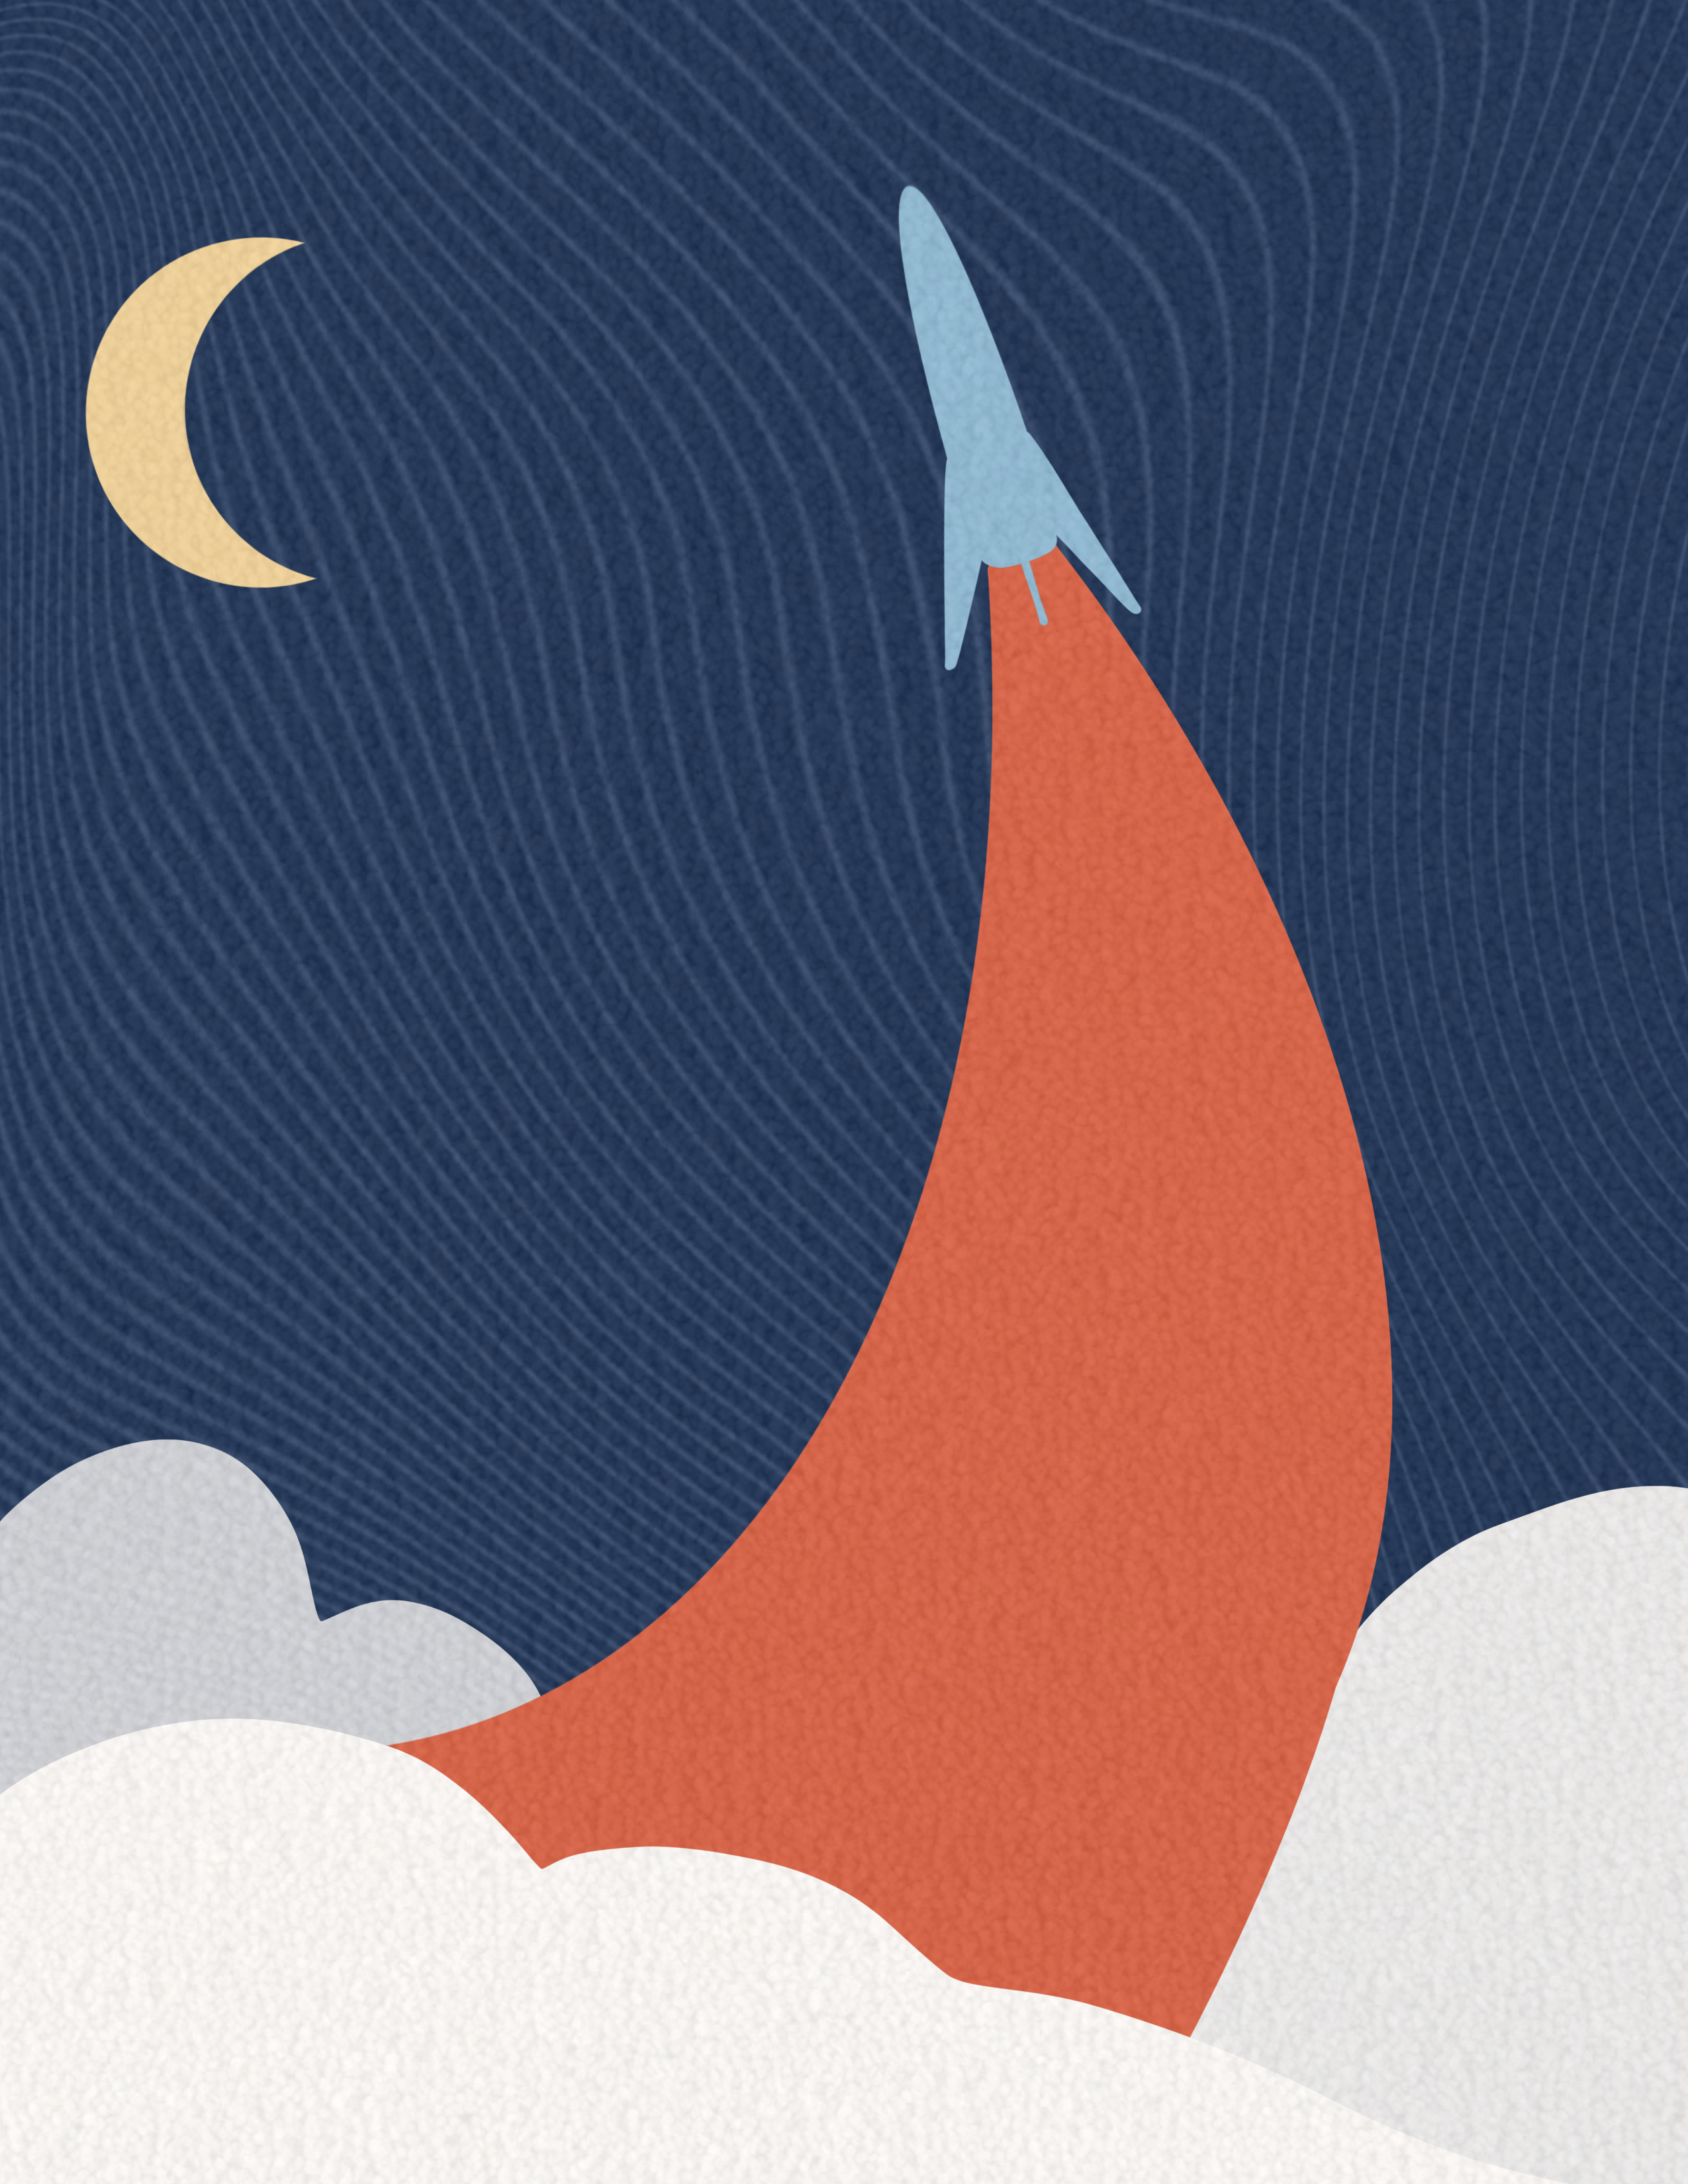 digital picture of blue rocketship rising above white clouds in dark blue sky with light blue lines and yellow crescent moon